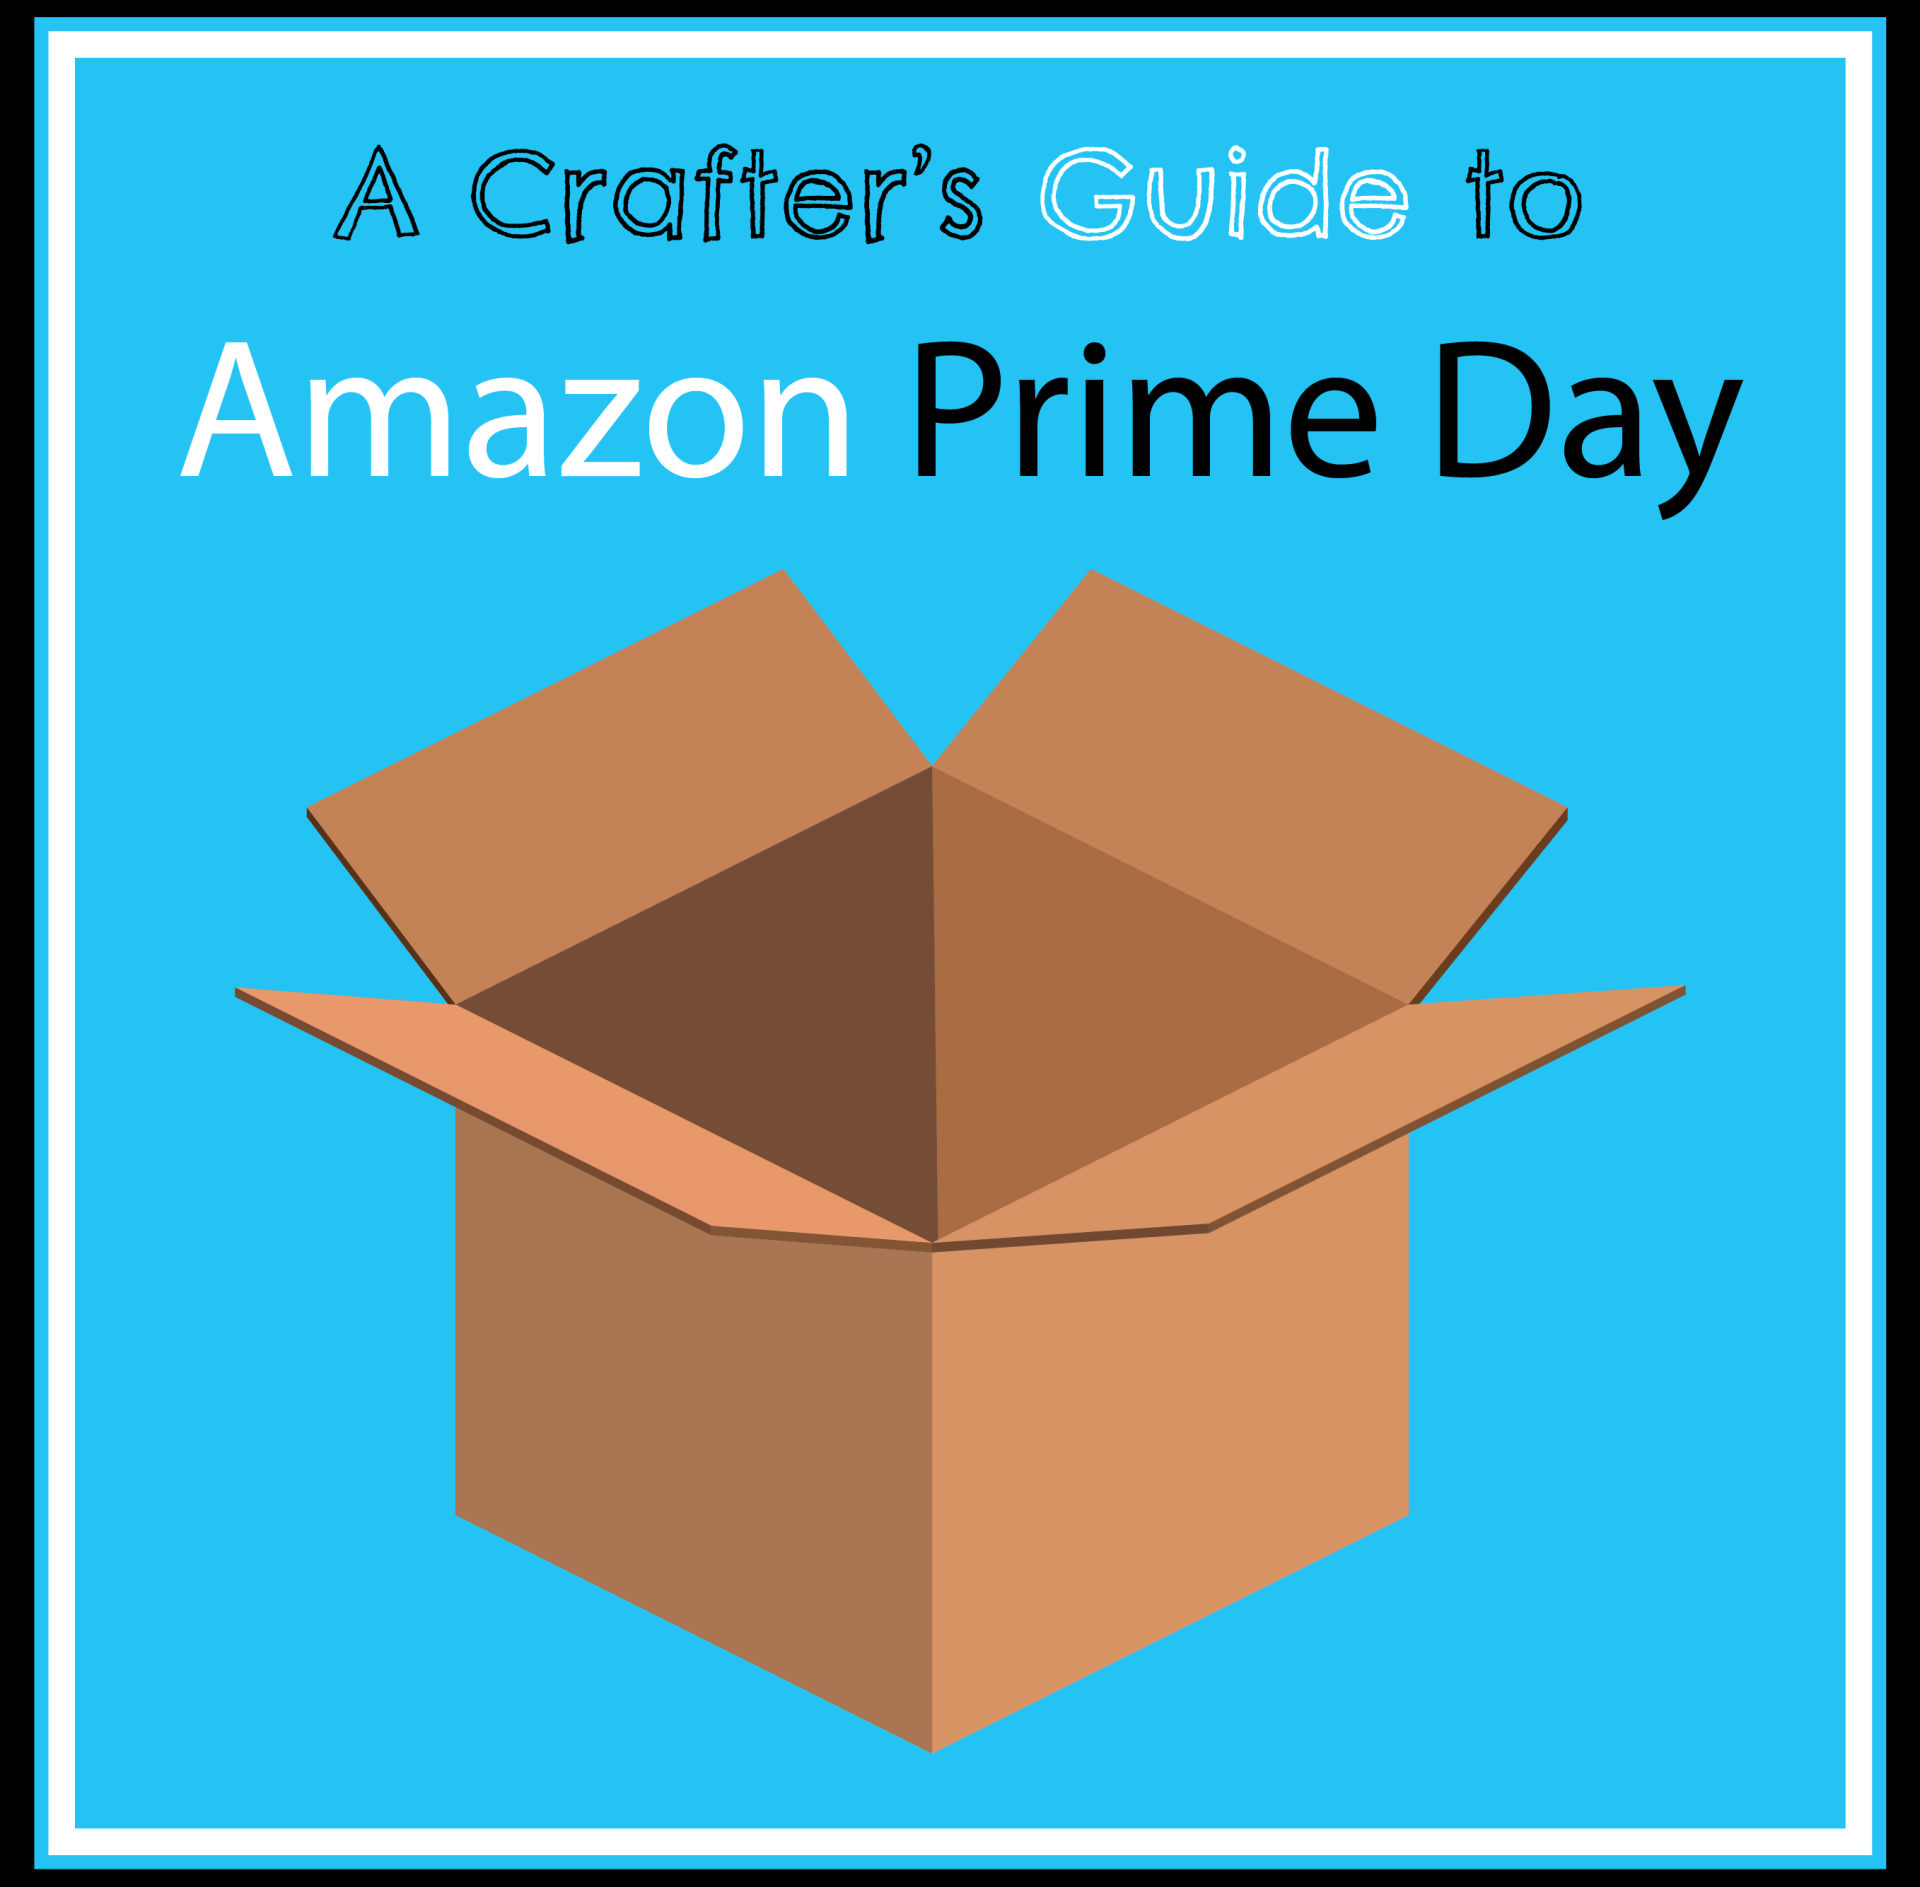 A Crafter’s Guide to Cricut Amazon Prime Day 2020